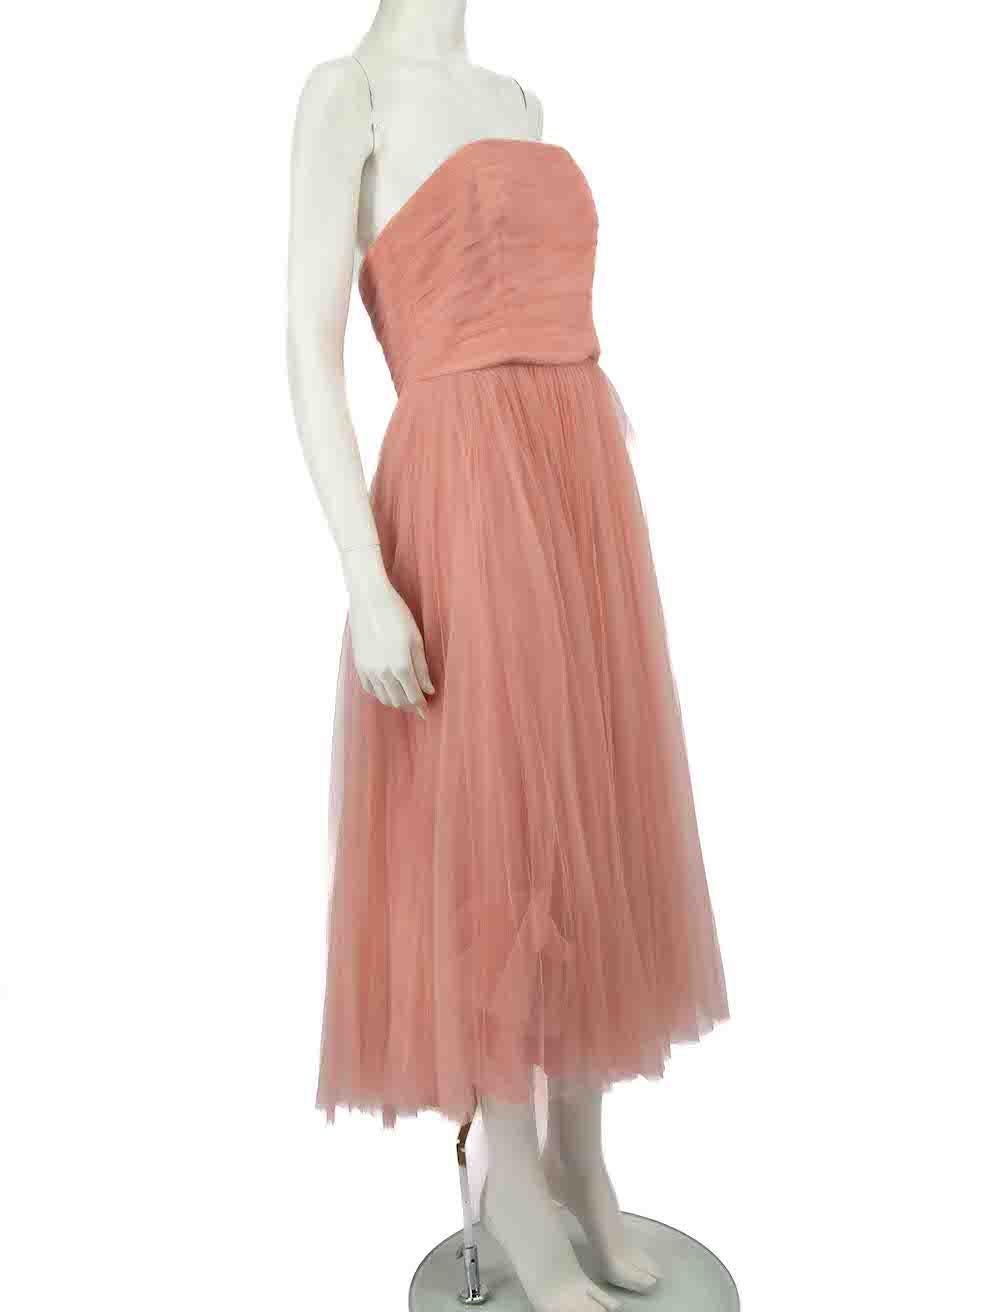 CONDITION is Very good. Hardly any visible wear to dress is evident on this used Honayda designer resale item.
 
 
 
 Details
 
 
 Pink
 
 Tulle
 
 Gown
 
 Strapless
 
 Midi
 
 Pleated skirt
 
 Back zip and hook fastening
 
 
 
 
 
 Made in Lebanon
